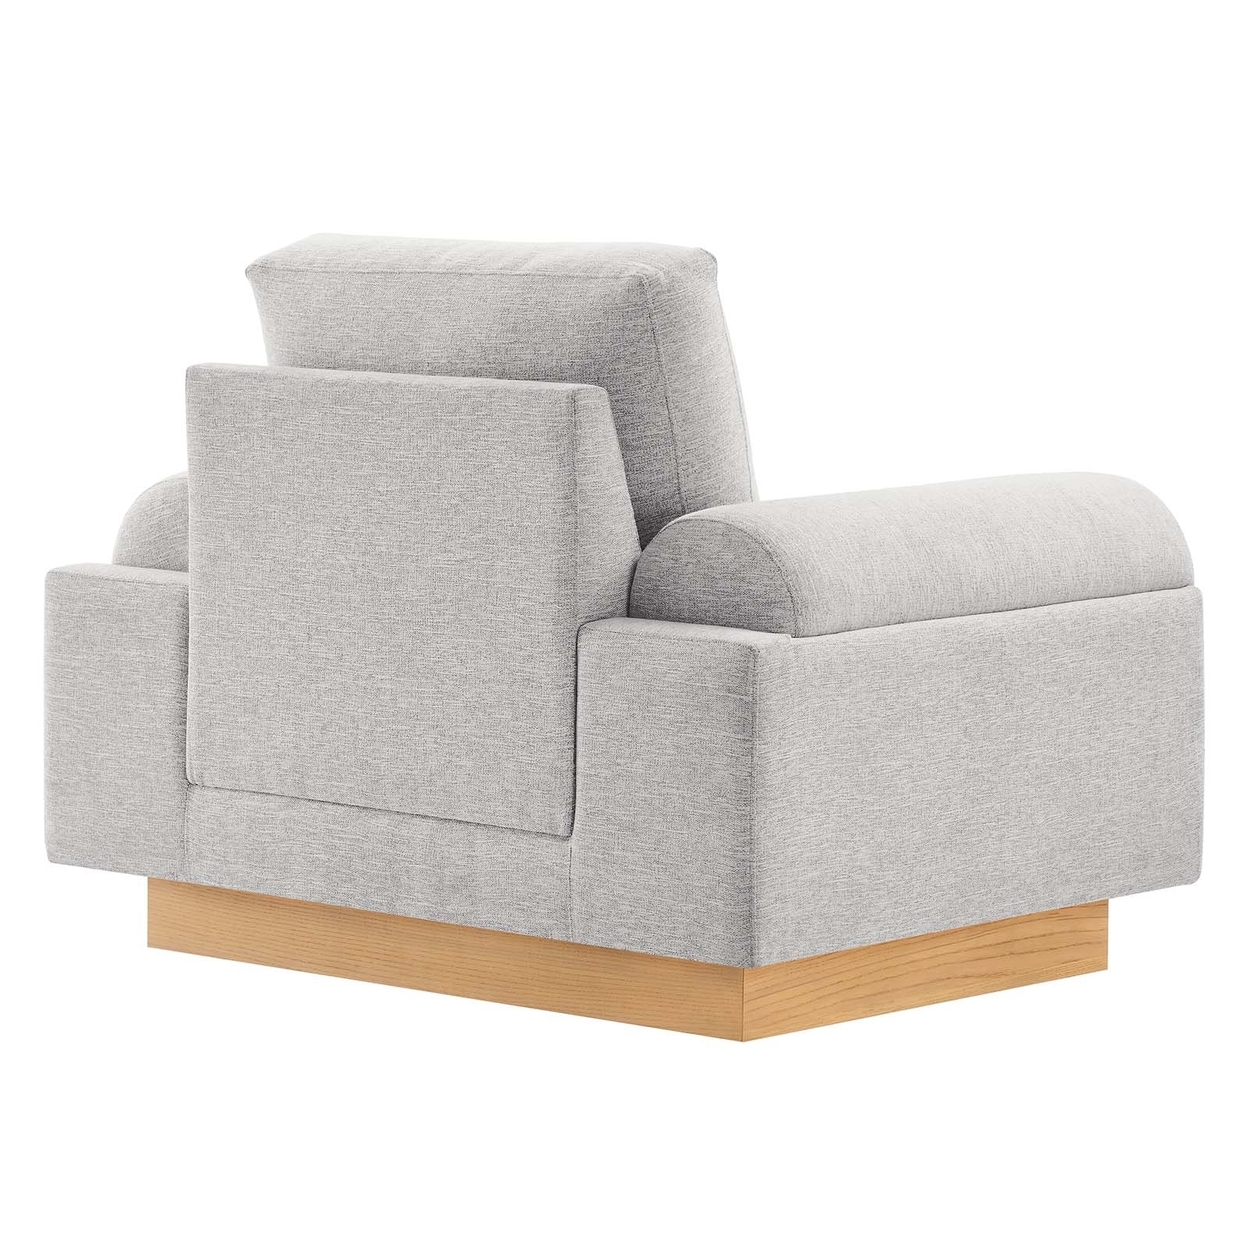 Oasis Upholstered Fabric Armchair, Light Gray